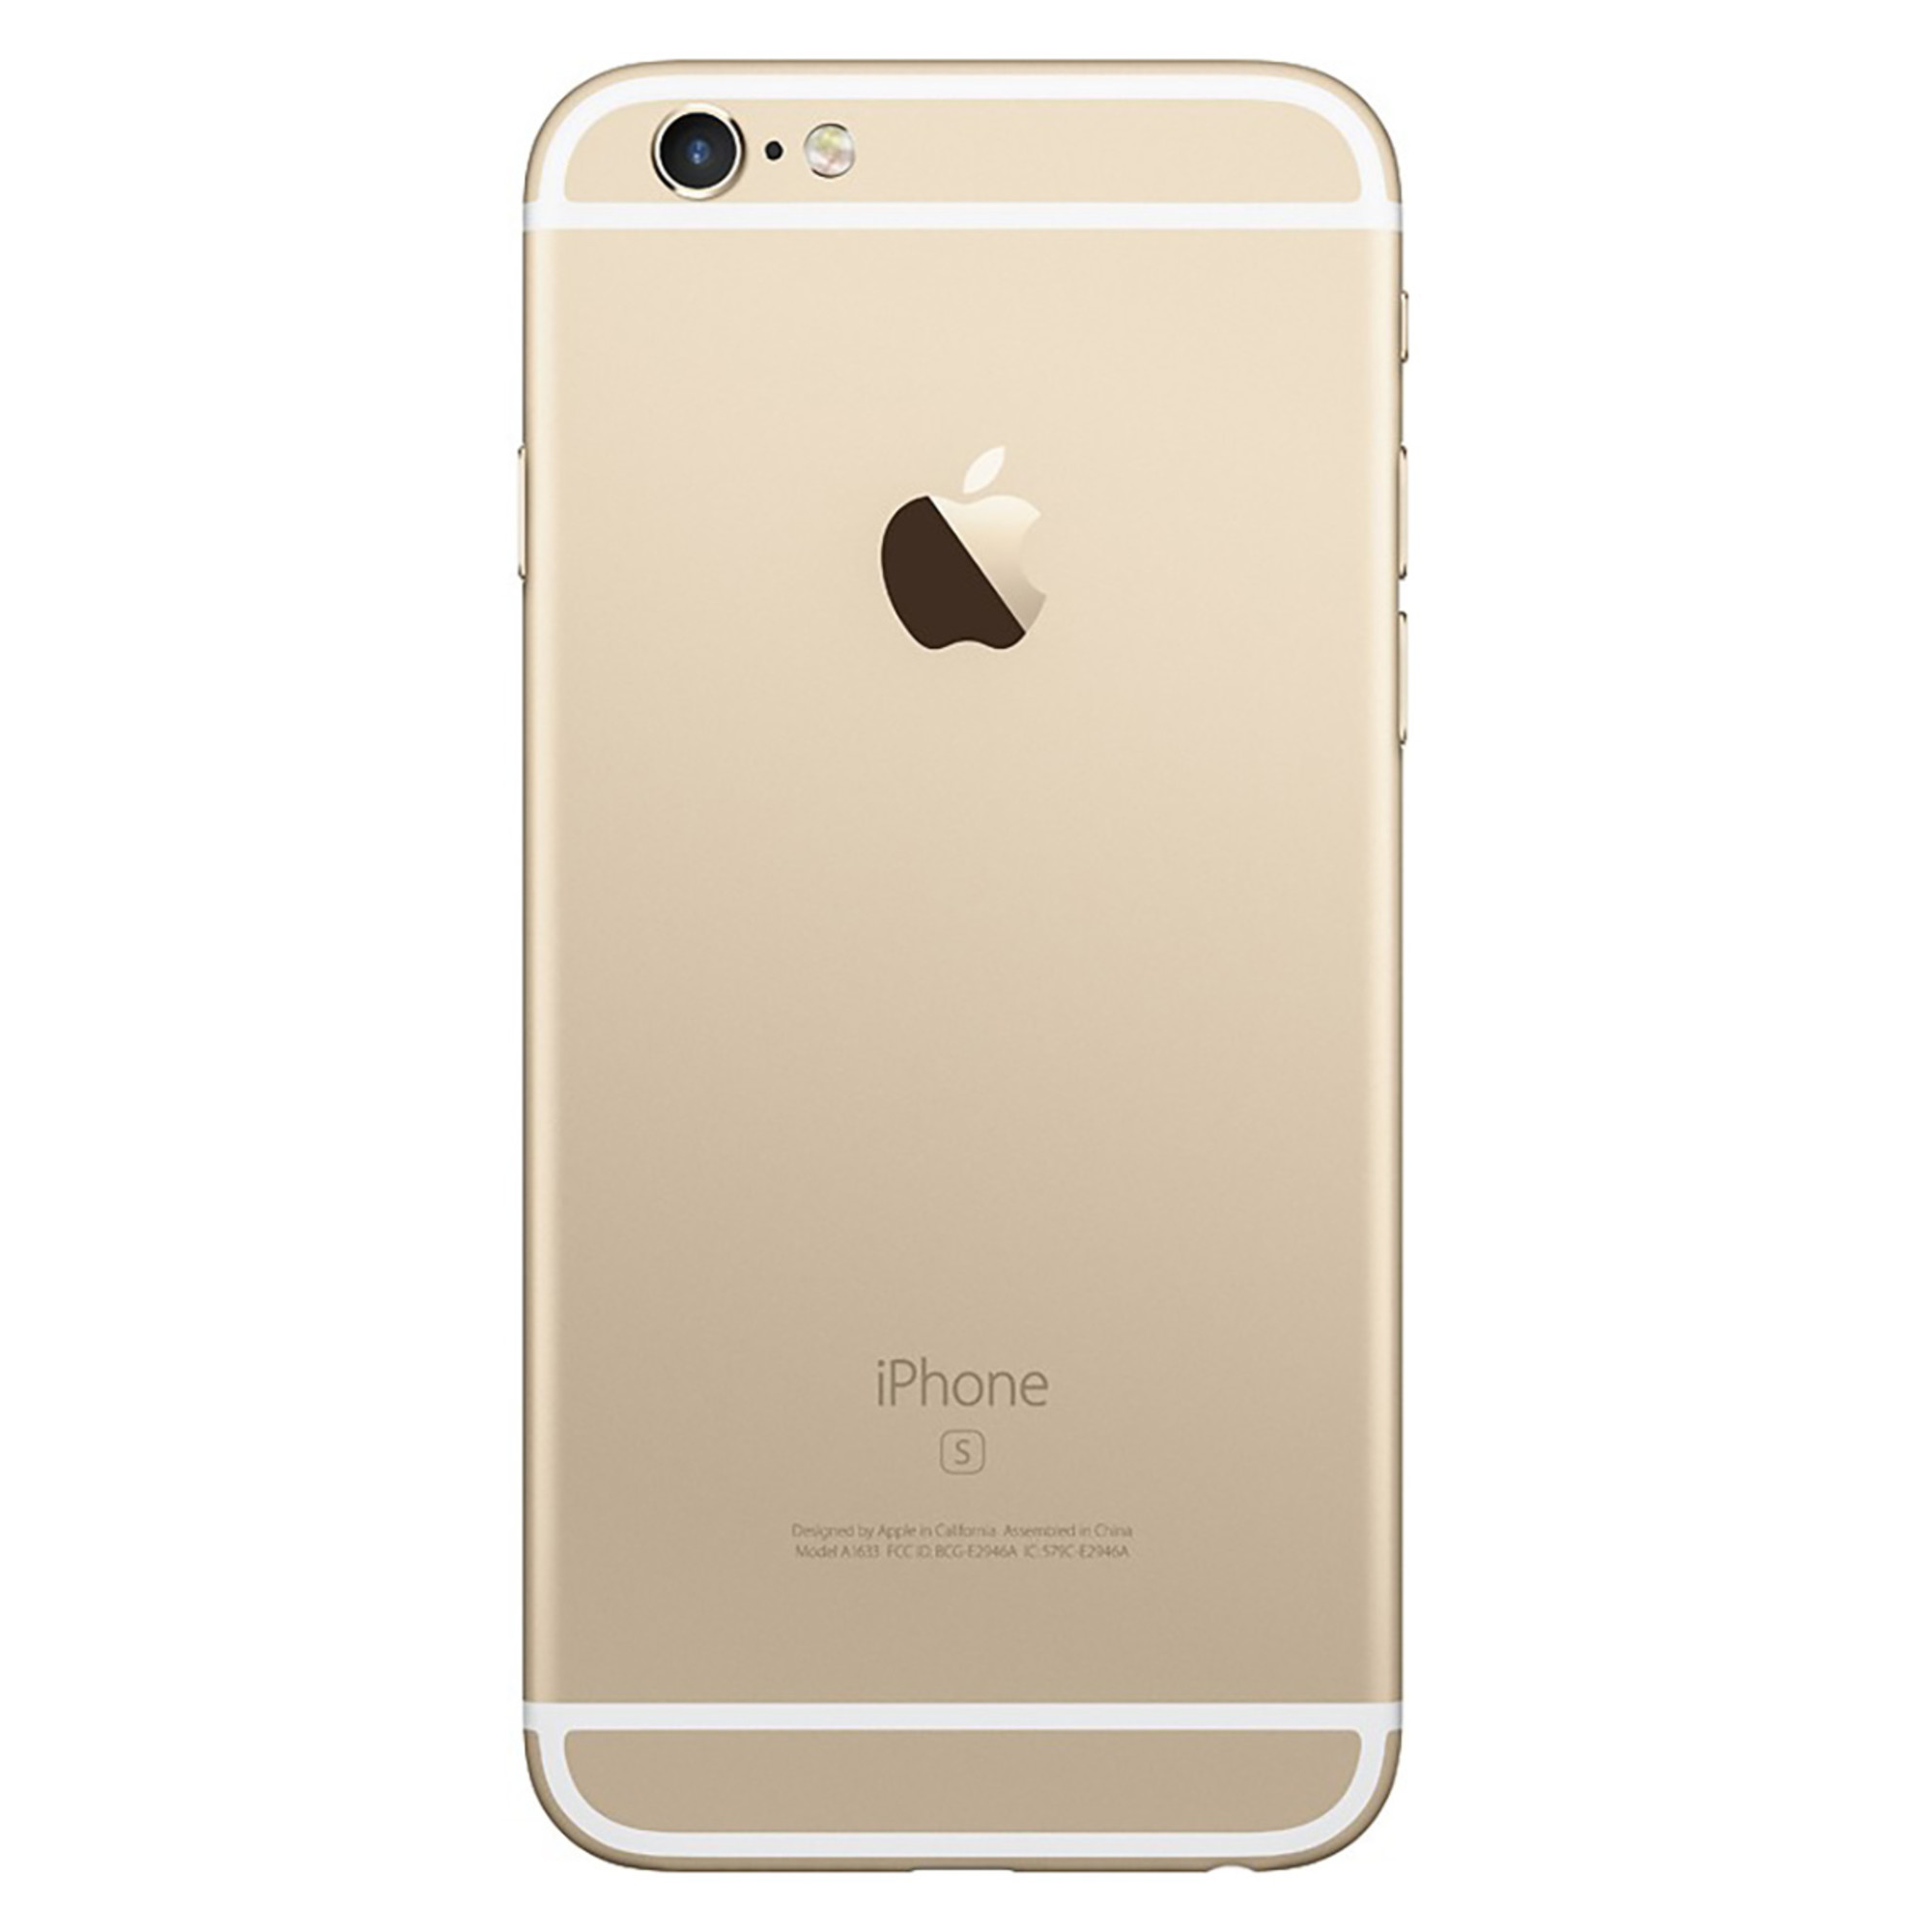 Pre-Owned Apple iPhone 6s 32GB GSM Phone - Gold + WeCare Alcohol Wipes Pack (50 Wipes) - image 5 of 6